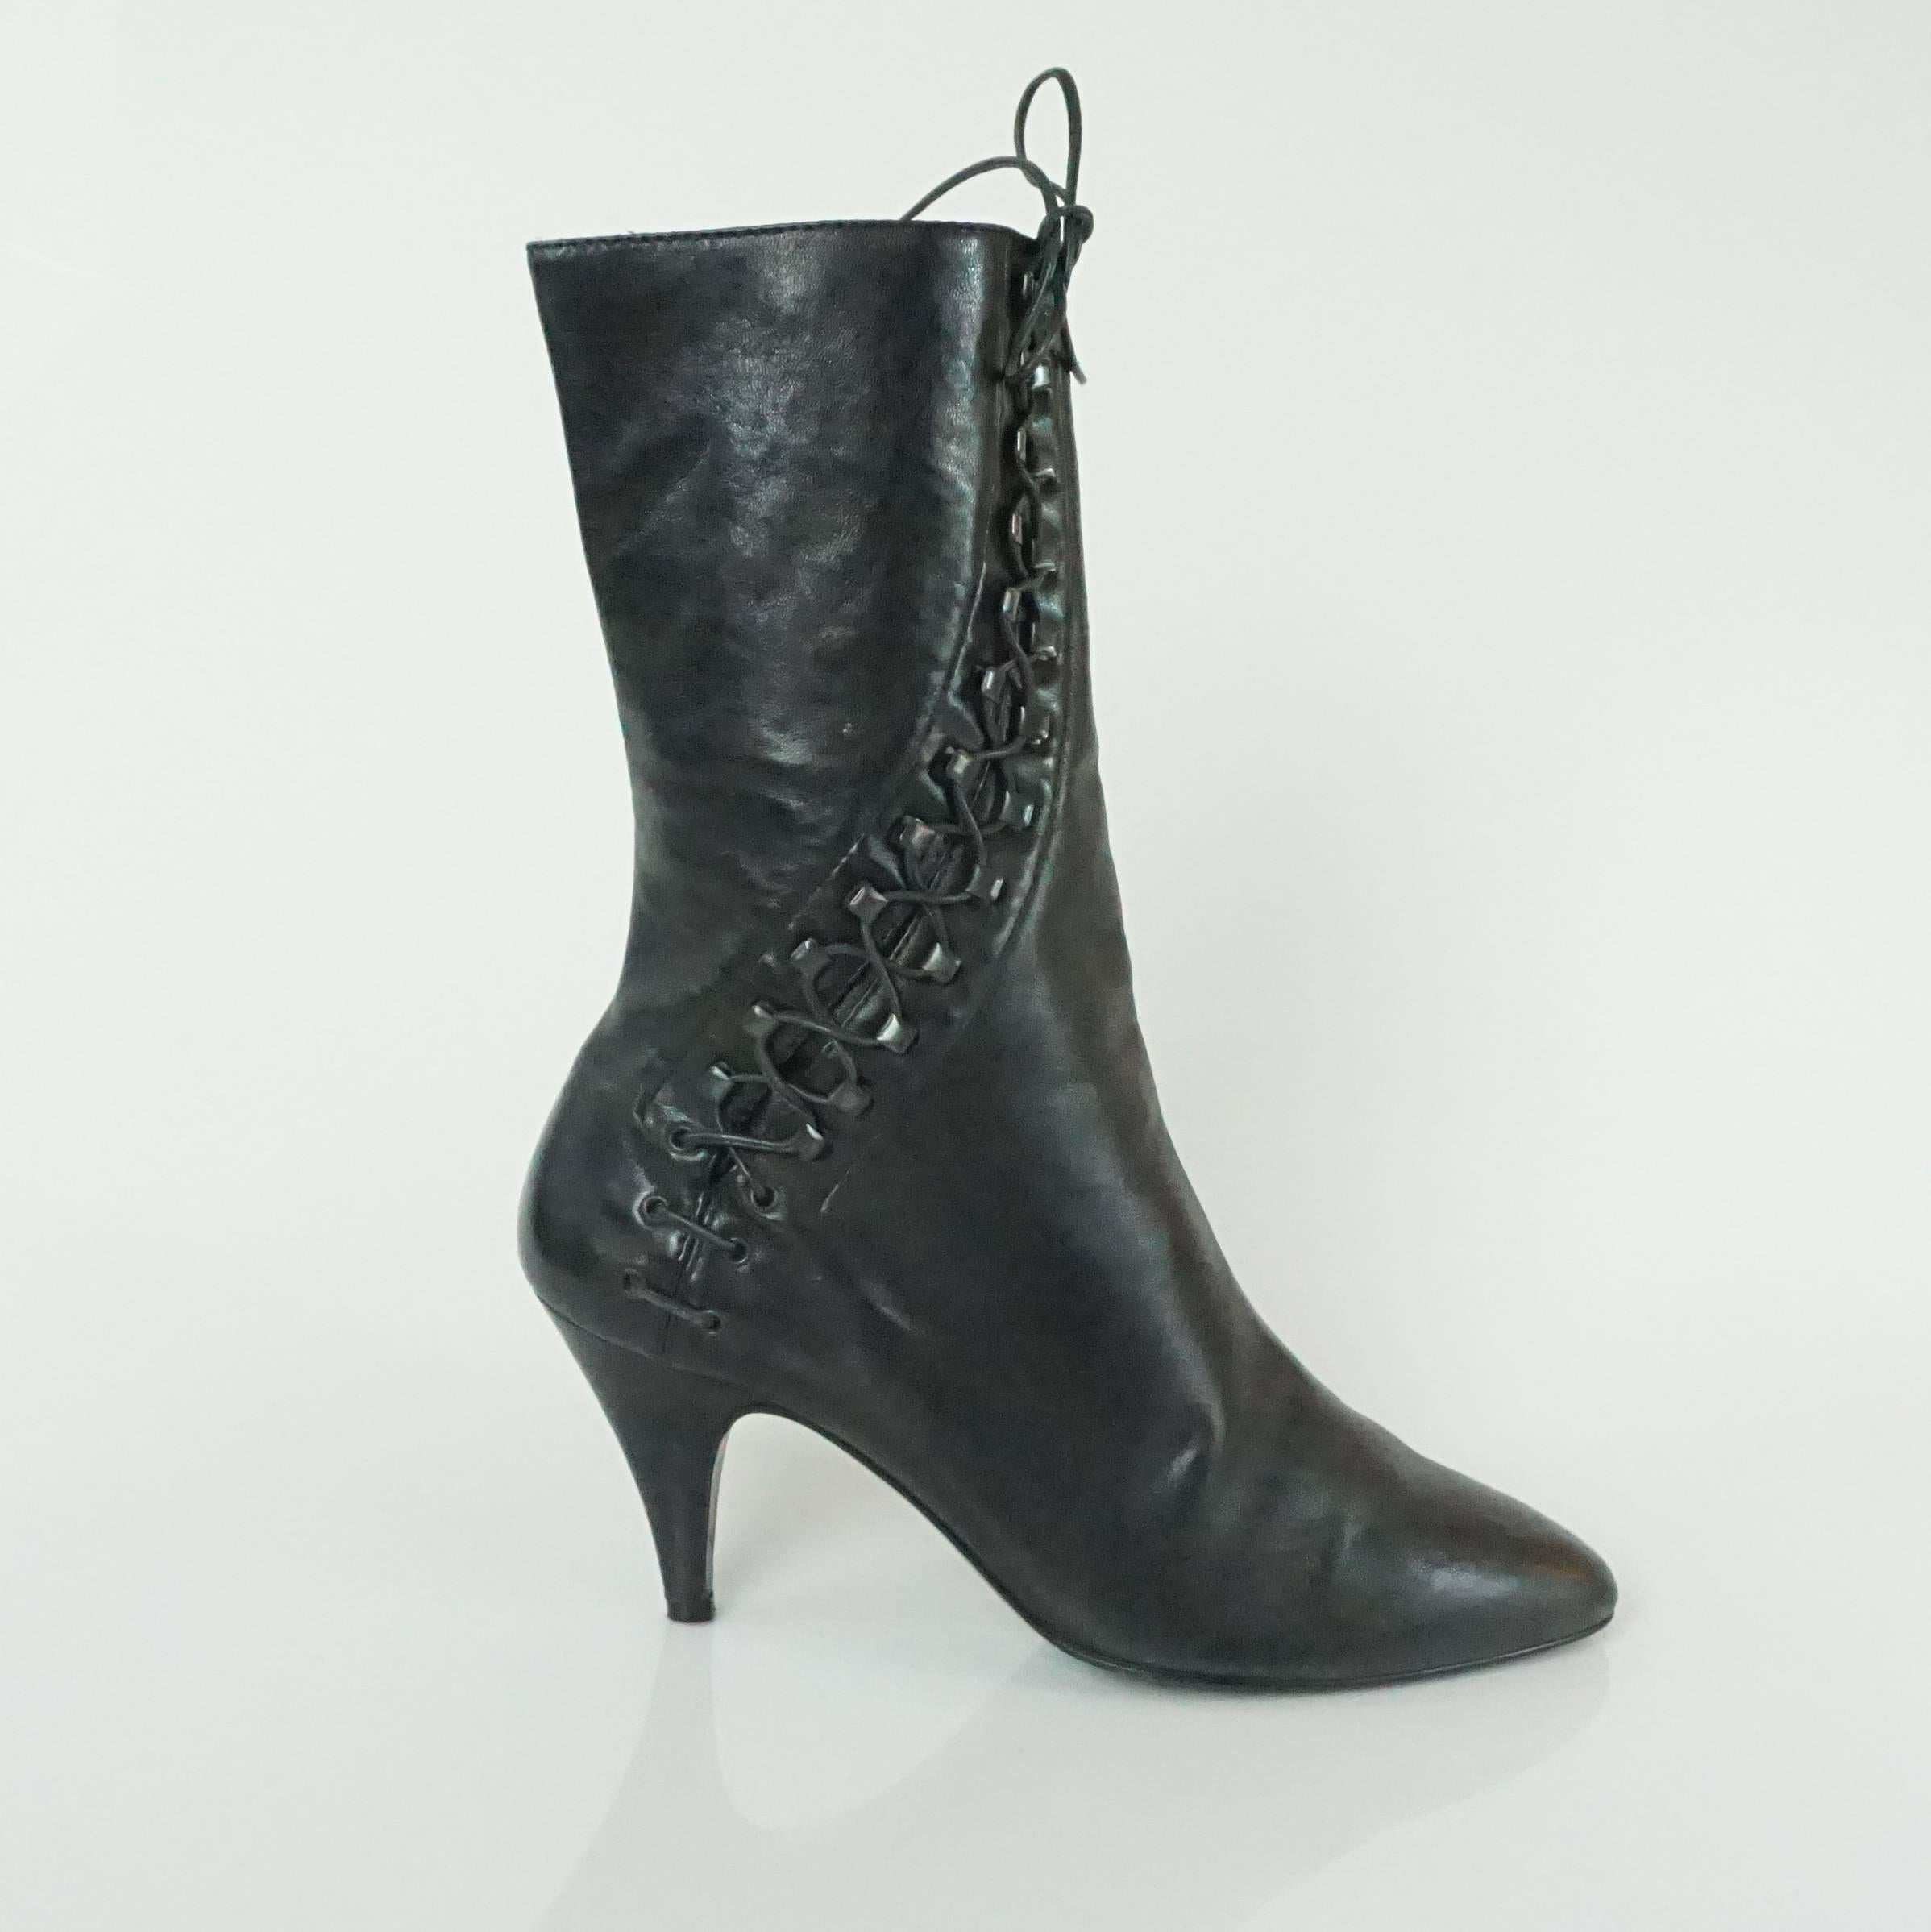 Azzedine Alaia Black Lambskin Boots with Lace-Up Sides - 37.5 - 1990's. These gorgeous boots are a hot find for fall. They are mid-calf length with black stud-like lace-up sides. They are in very good condition with light wear to the leather as